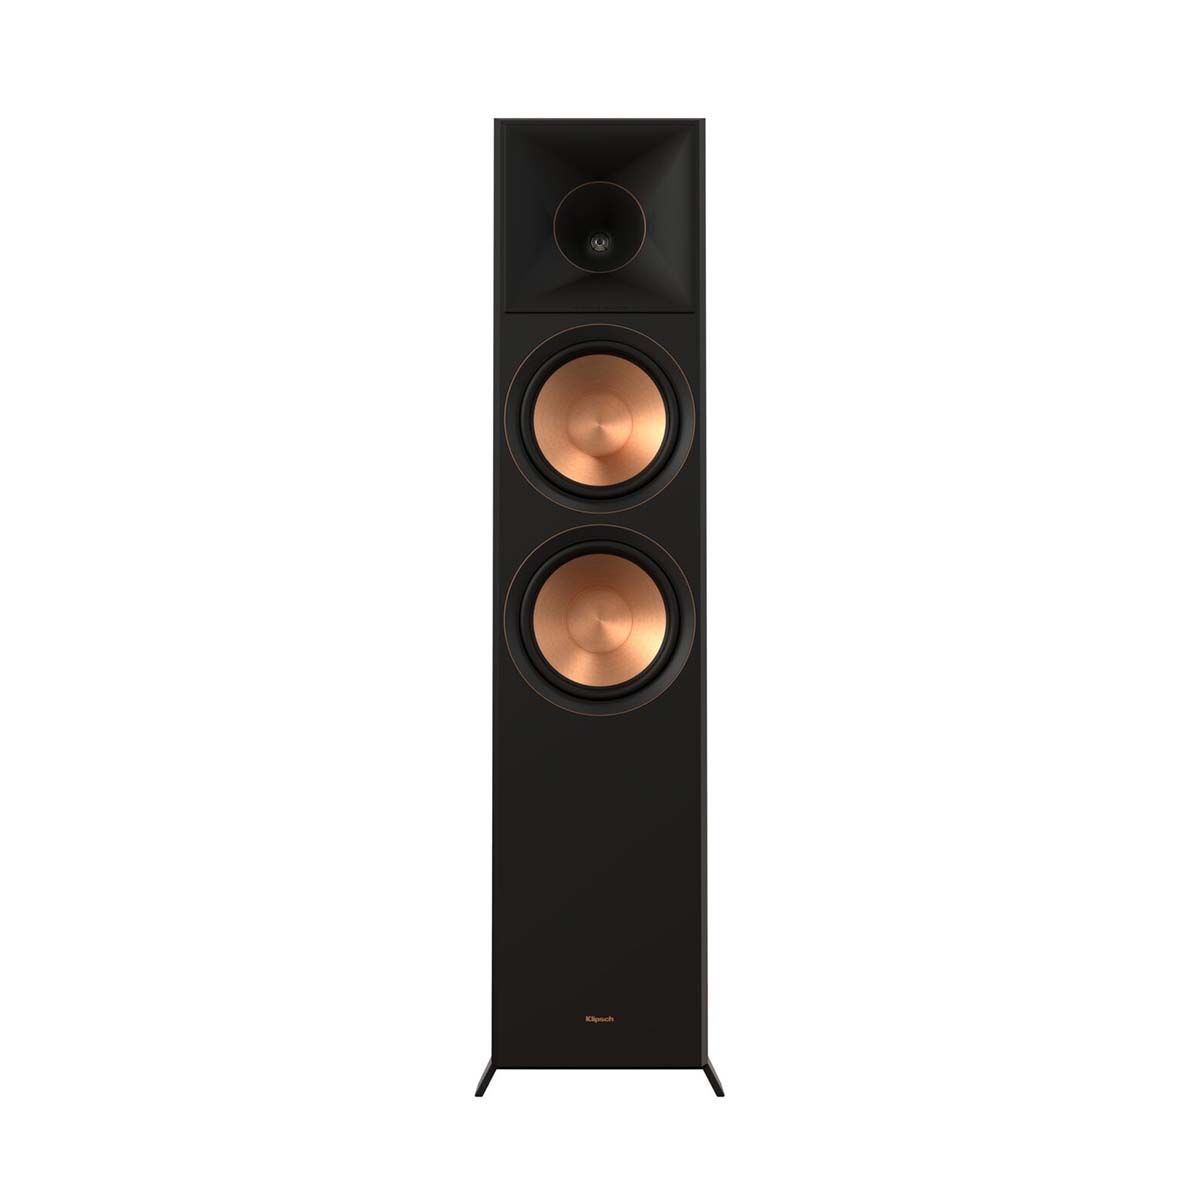 Klipsch RP-8060FA II Dolby Atmos Floorstanding Speaker - Ebony - front view without grill